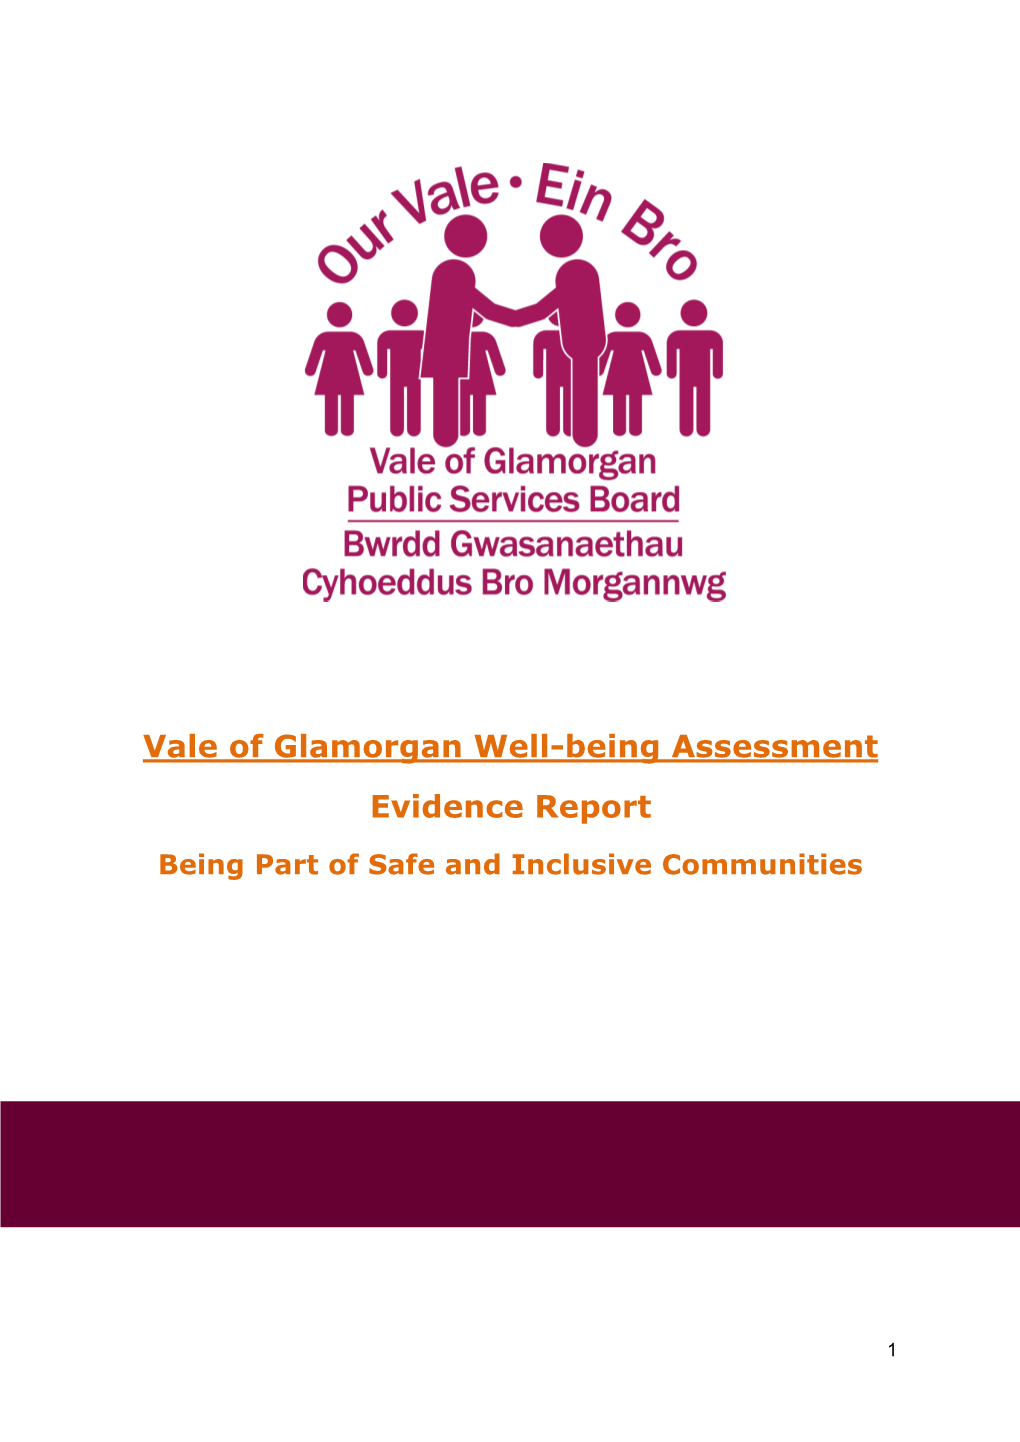 Vale of Glamorgan Well-Being Assessment Evidence Report